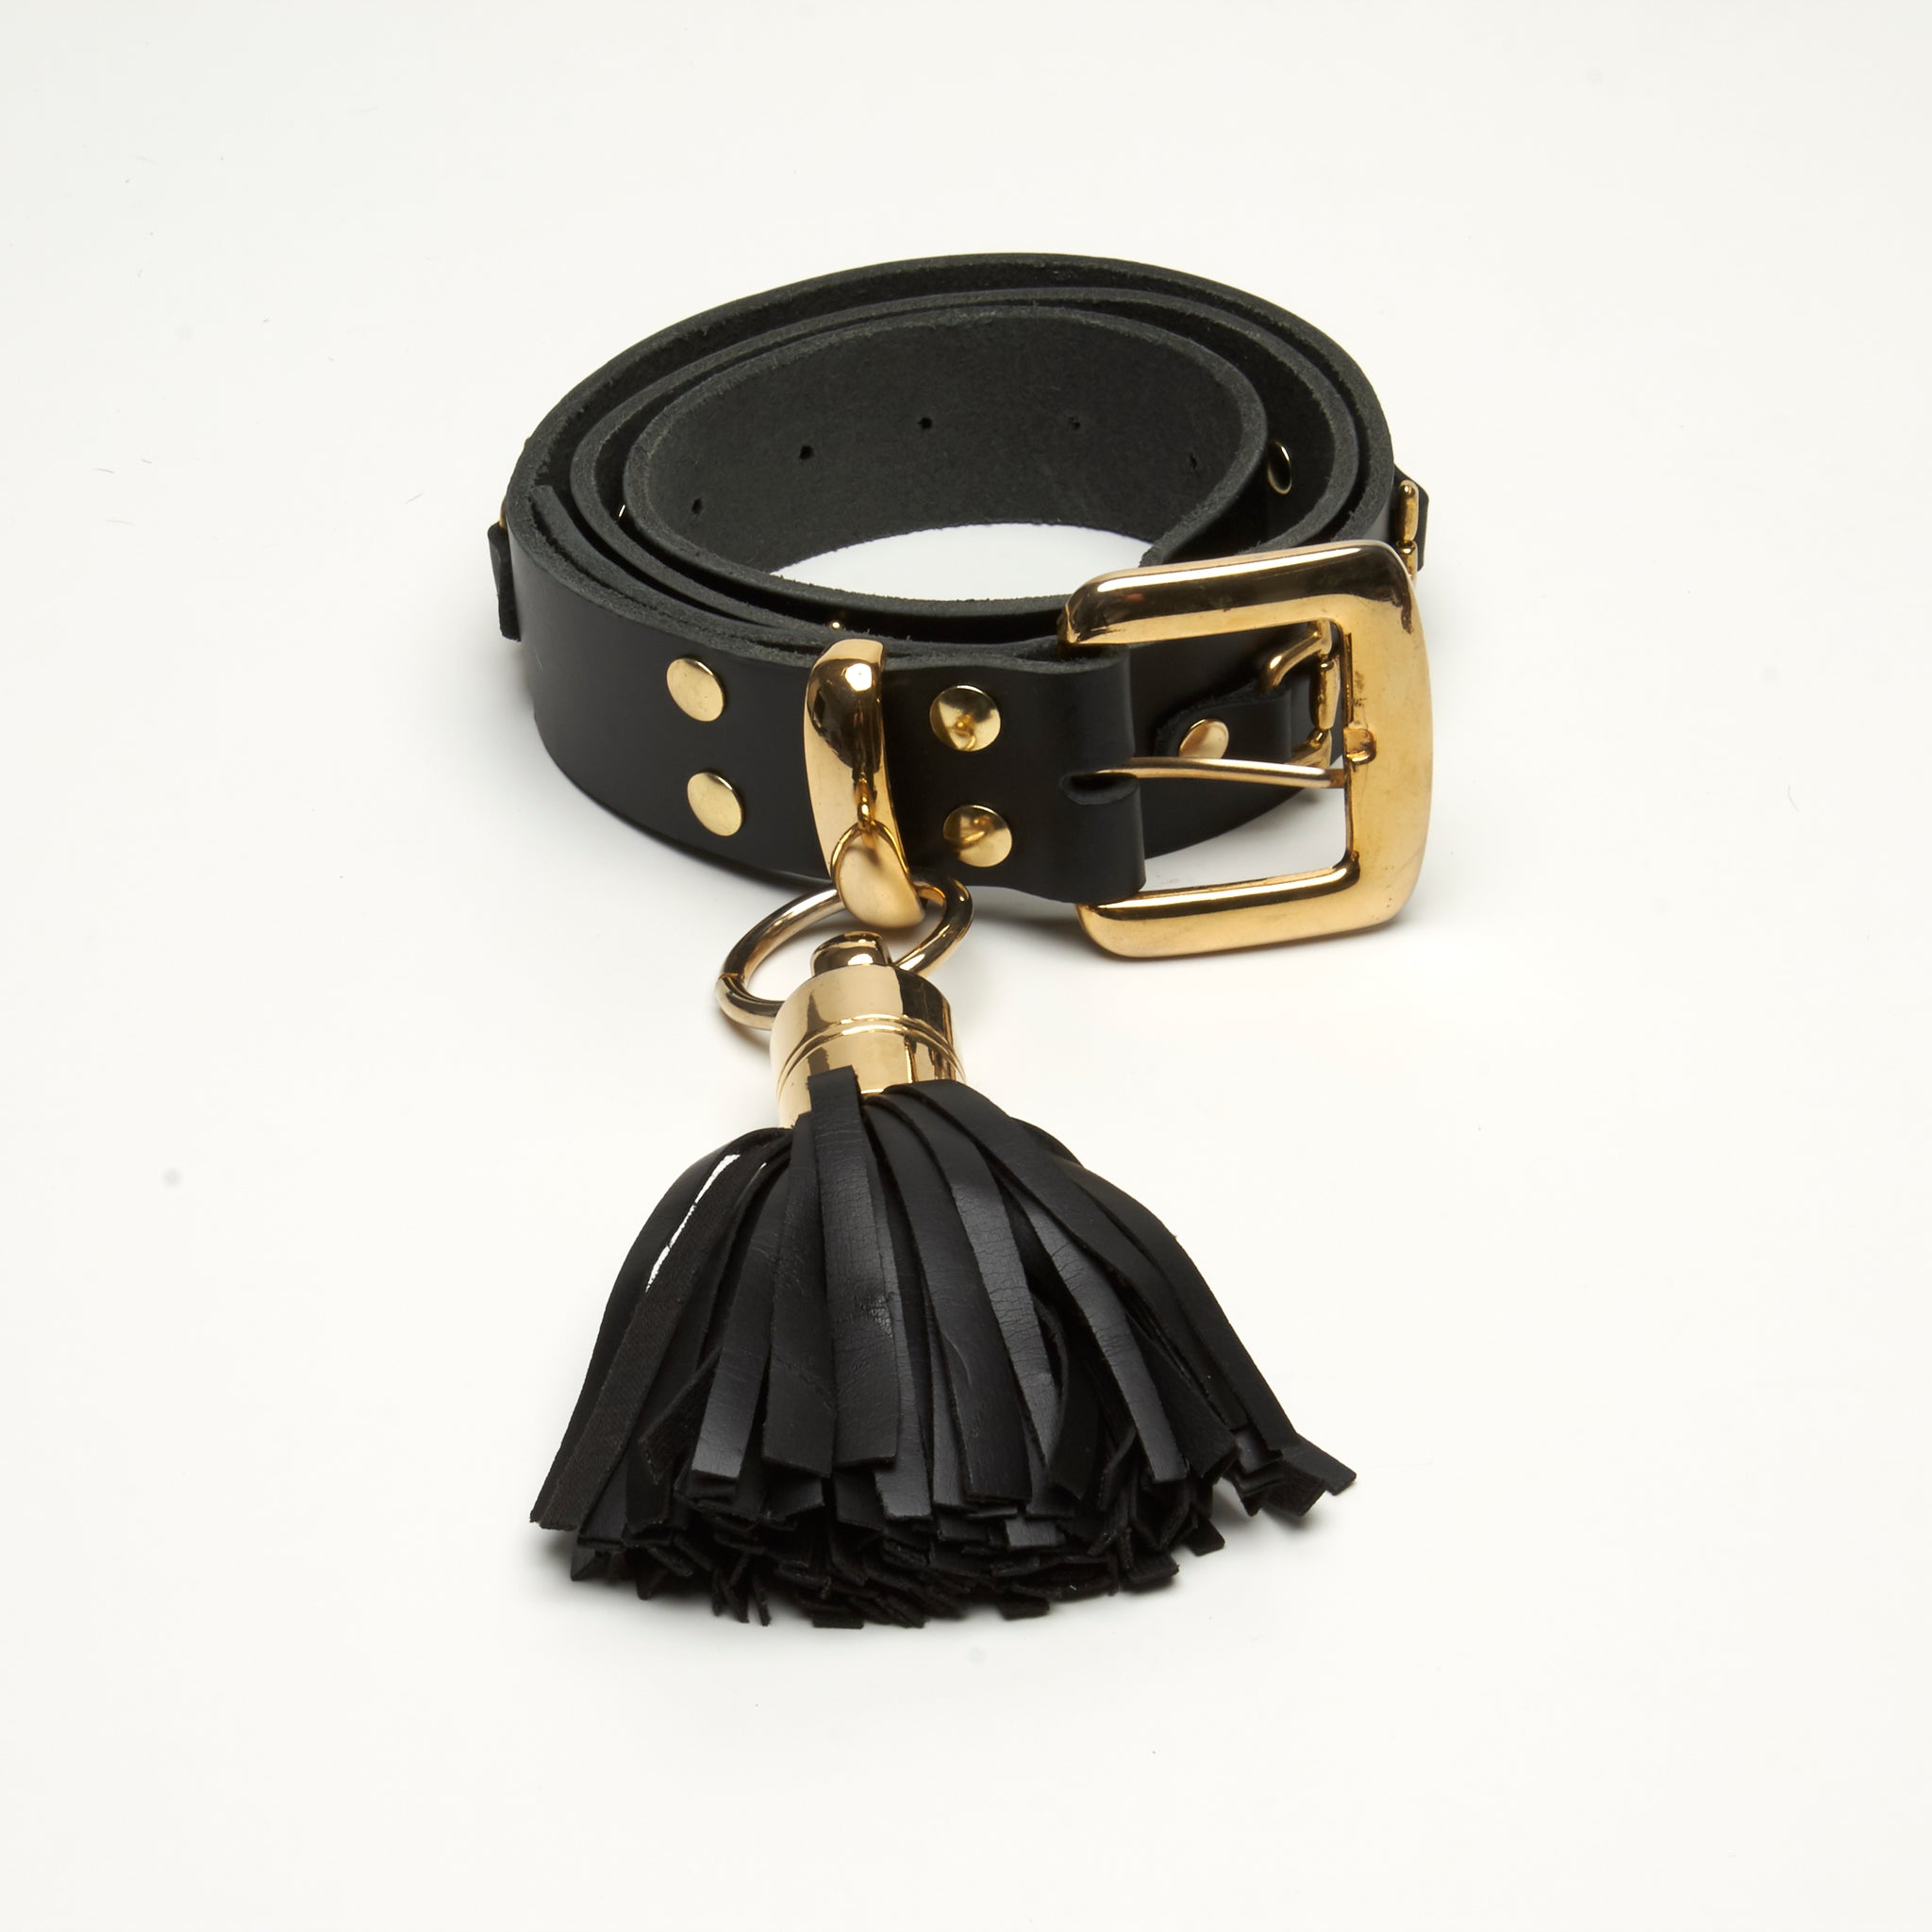 LEATHER, GOLD HORSE BIT D-RING HARDWARE AND TASSEL. by NYET Jewelry.